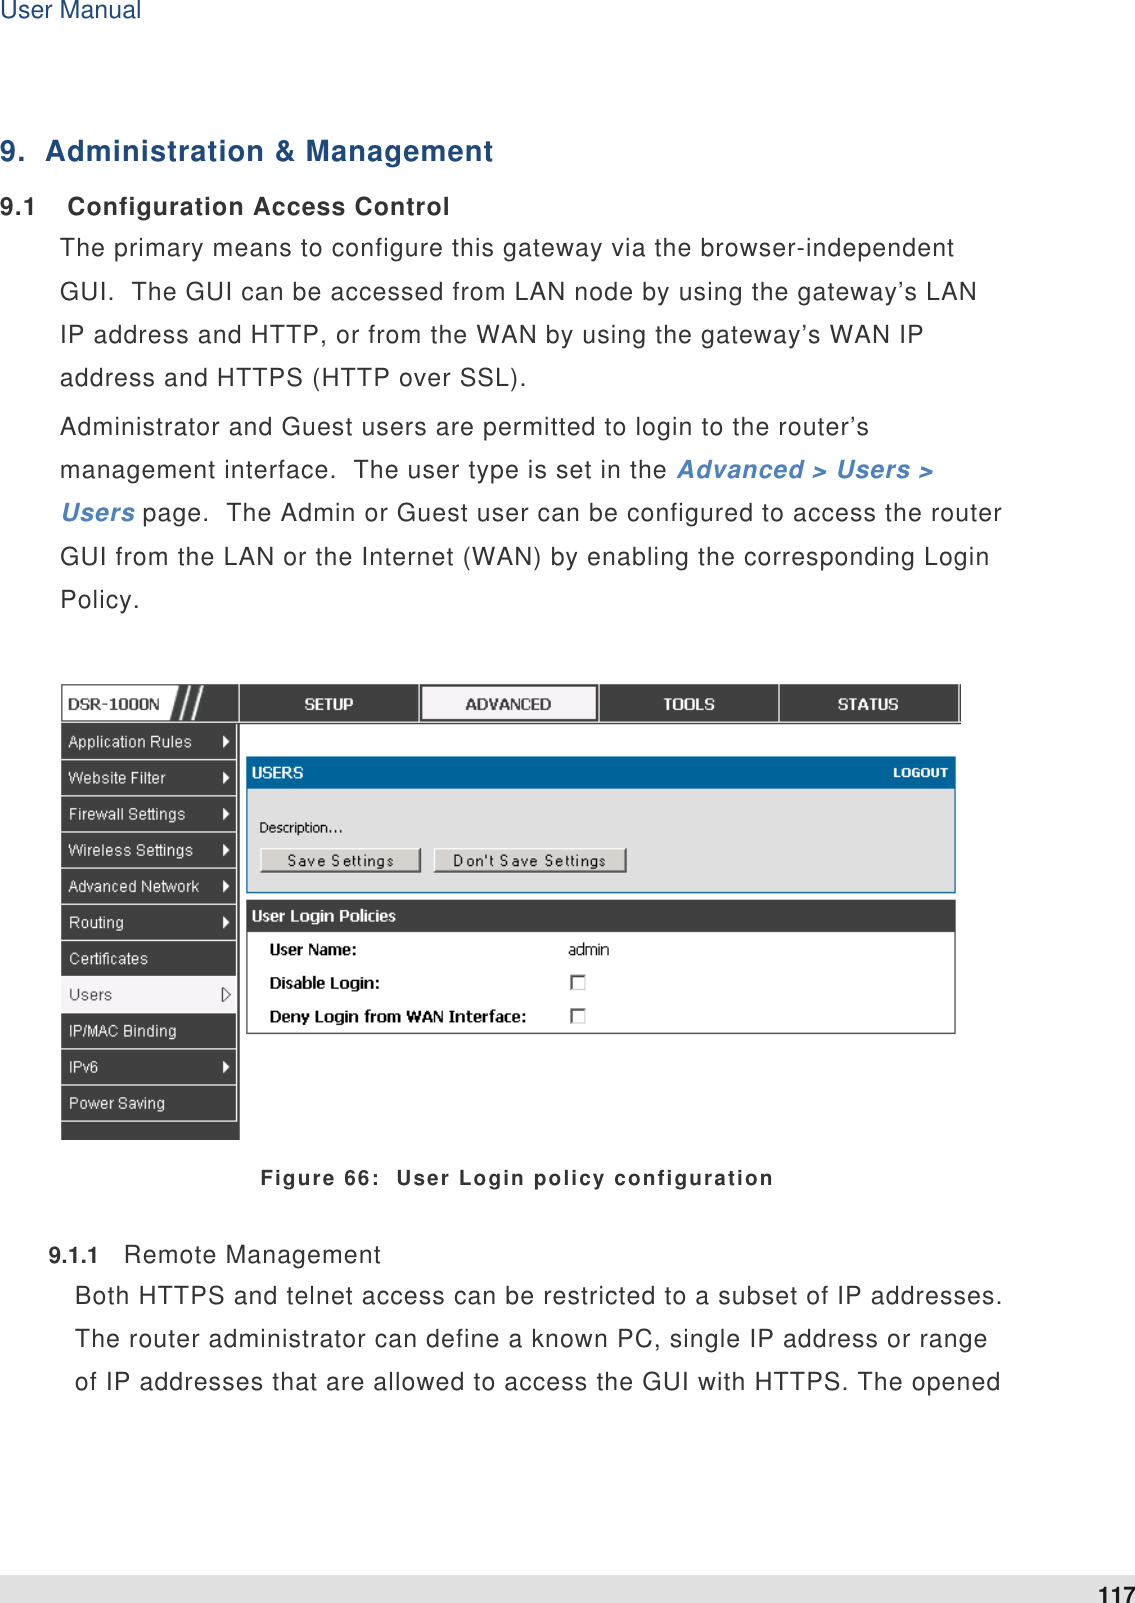 User Manual 117   9.  Administration &amp; Management 9.1  Configuration Access Control The primary means to configure this gateway via the browser-independent GUI.  The GUI can be accessed from LAN node by using the gateway’s LAN IP address and HTTP, or from the WAN by using the gateway’s WAN IP address and HTTPS (HTTP over SSL).   Administrator and Guest users are permitted to login to the router’s management interface.  The user type is set in the Advanced &gt; Users &gt; Users page.  The Admin or Guest user can be configured to access the router GUI from the LAN or the Internet (WAN) by enabling the corresponding Login Policy.      Figure 66:  User Login policy configuration 9.1.1  Remote Management Both HTTPS and telnet access can be restricted to a subset of IP addresses. The router administrator can define a known PC, single IP address or range of IP addresses that are allowed to access the GUI with HTTPS. The opened 